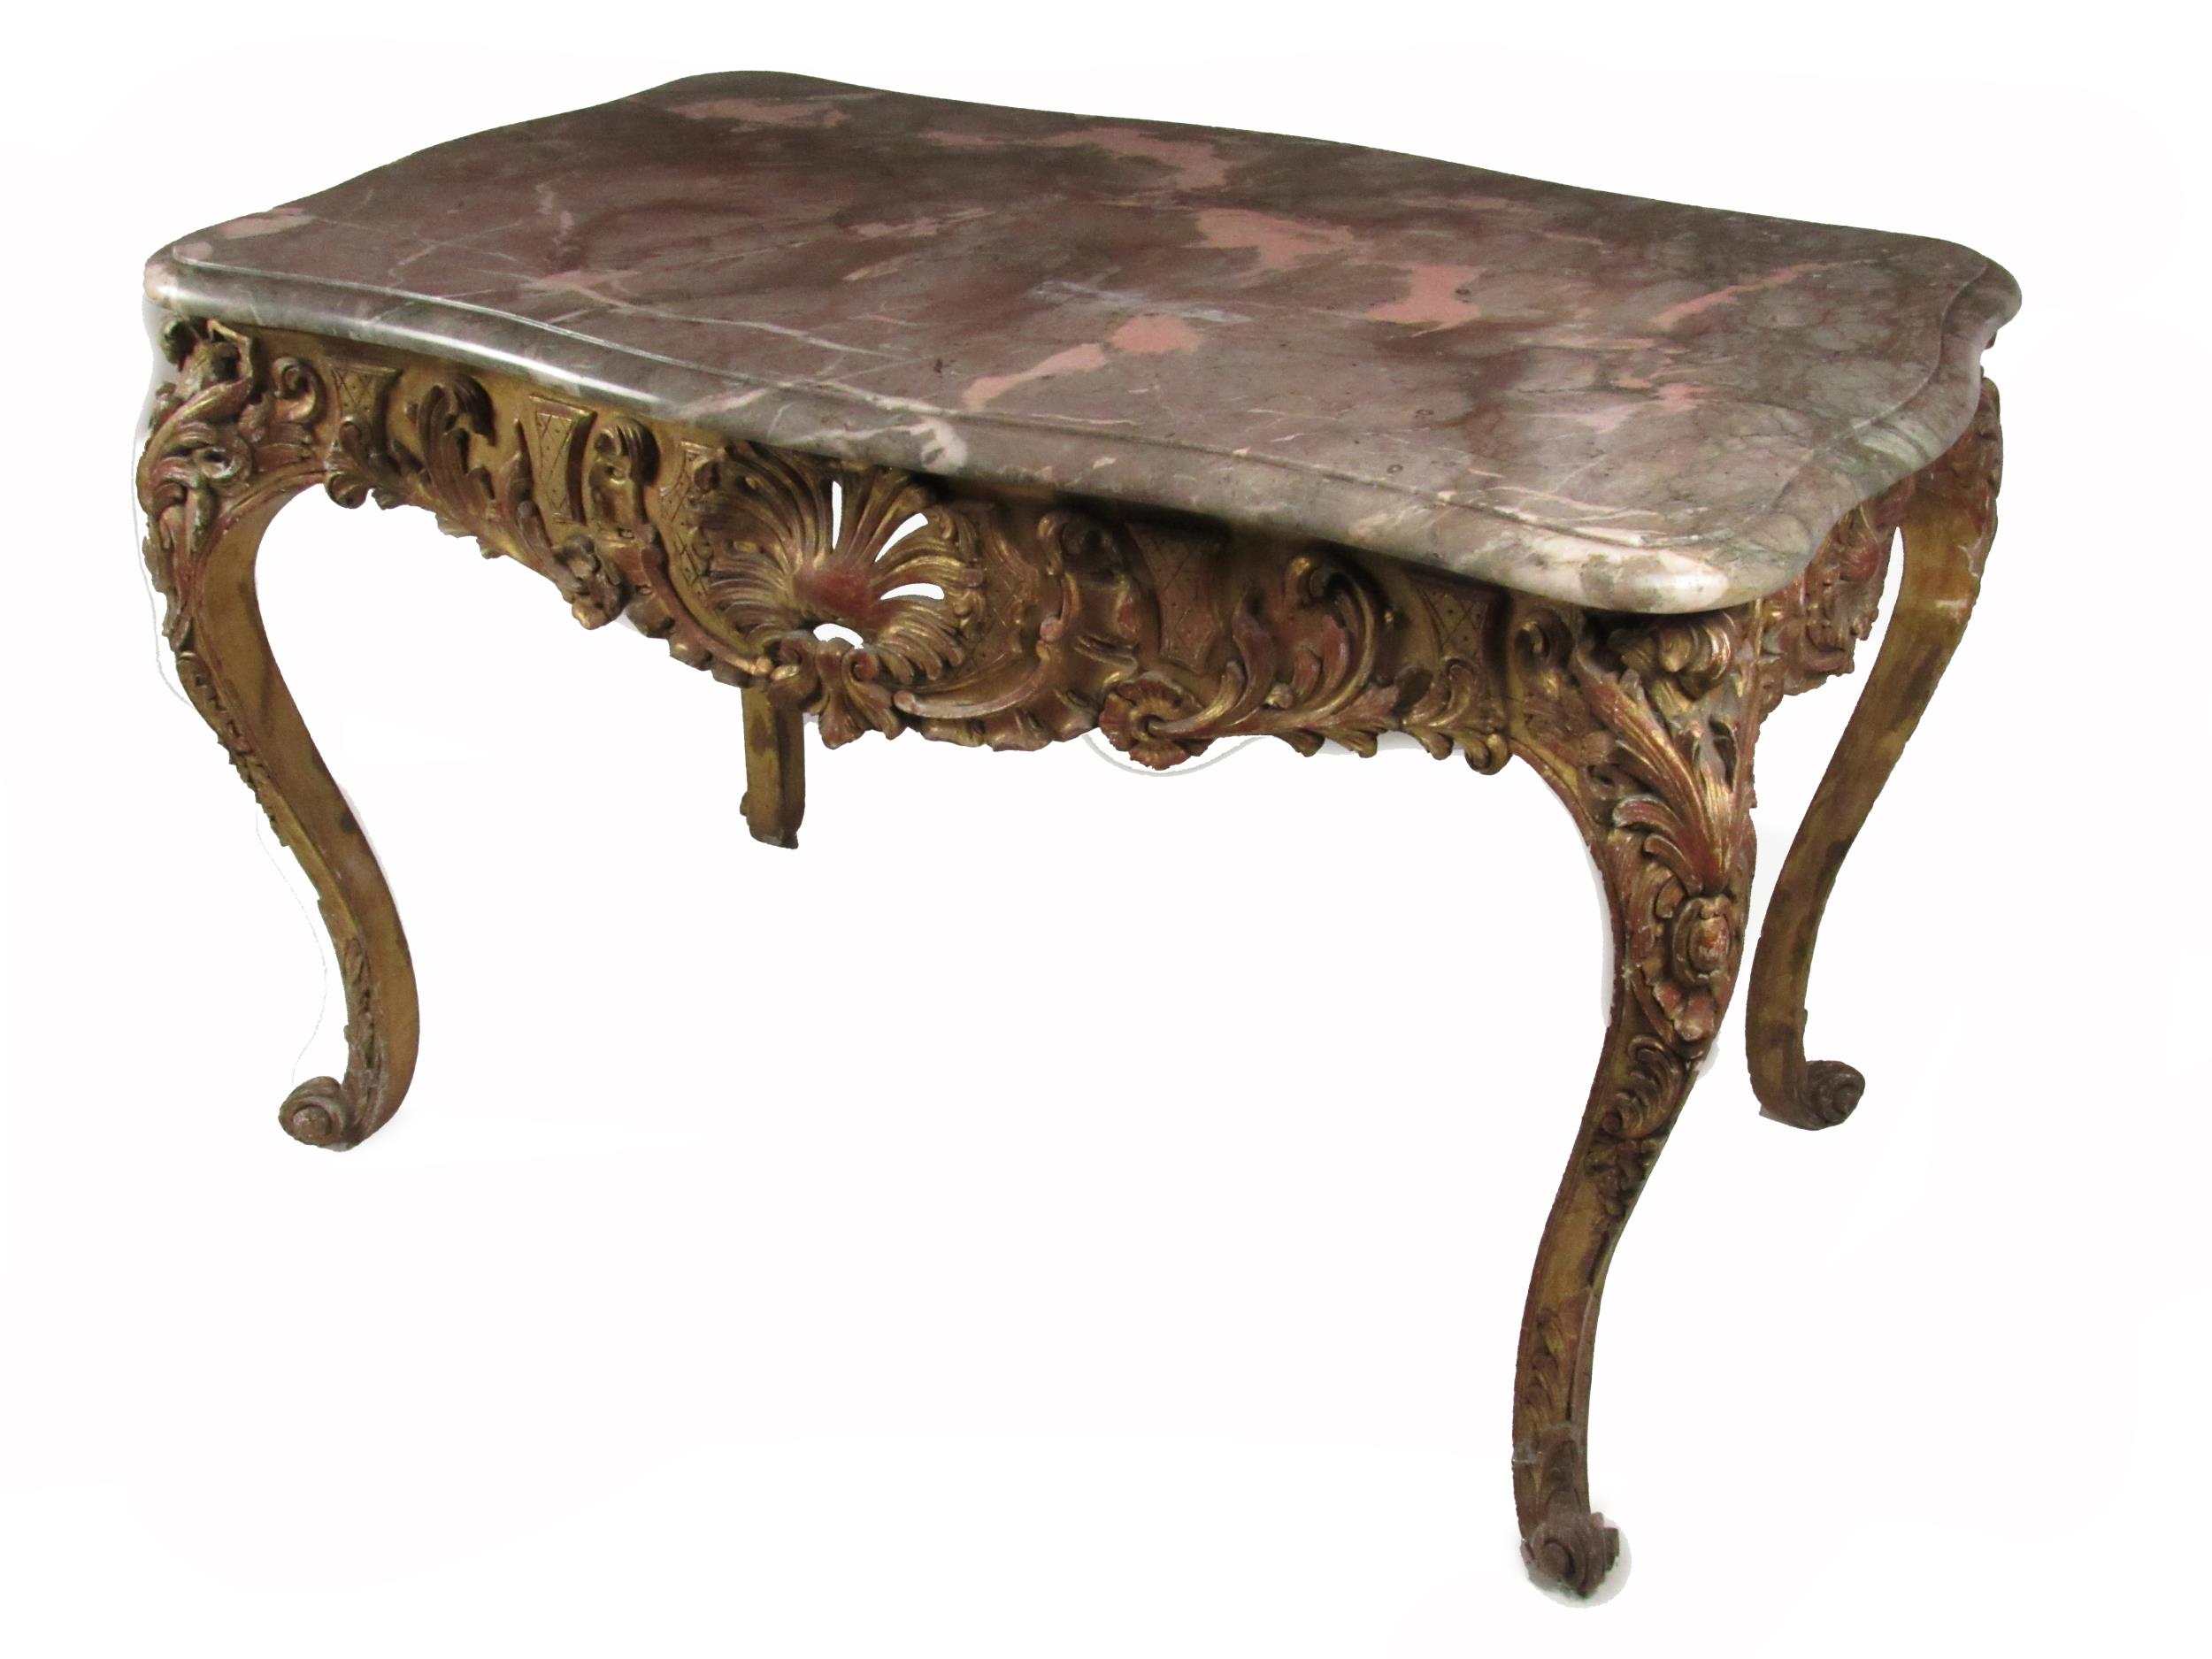 An attractive late 18th / early 19th Century French giltwood Centre Table, with moulded mottled grey